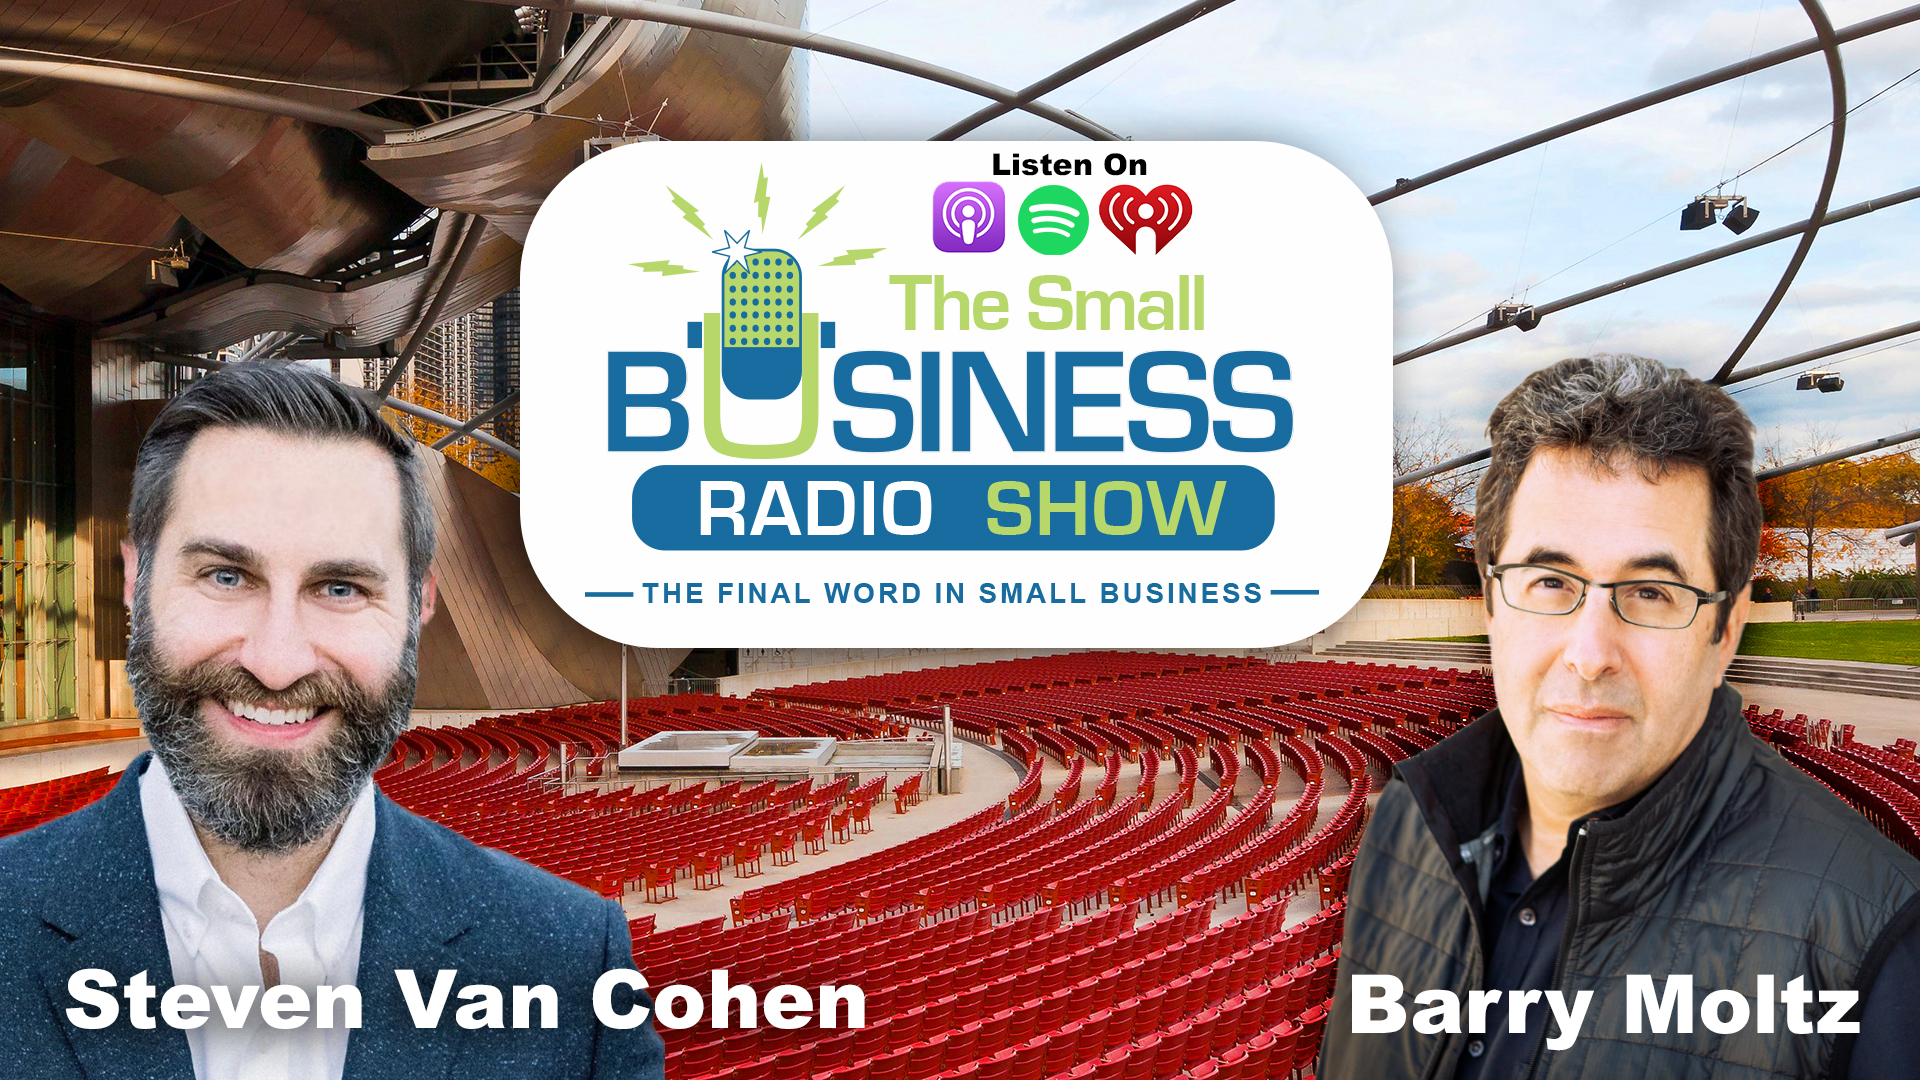 Steven Van Cohen on The Small Business Radio Show loneliness